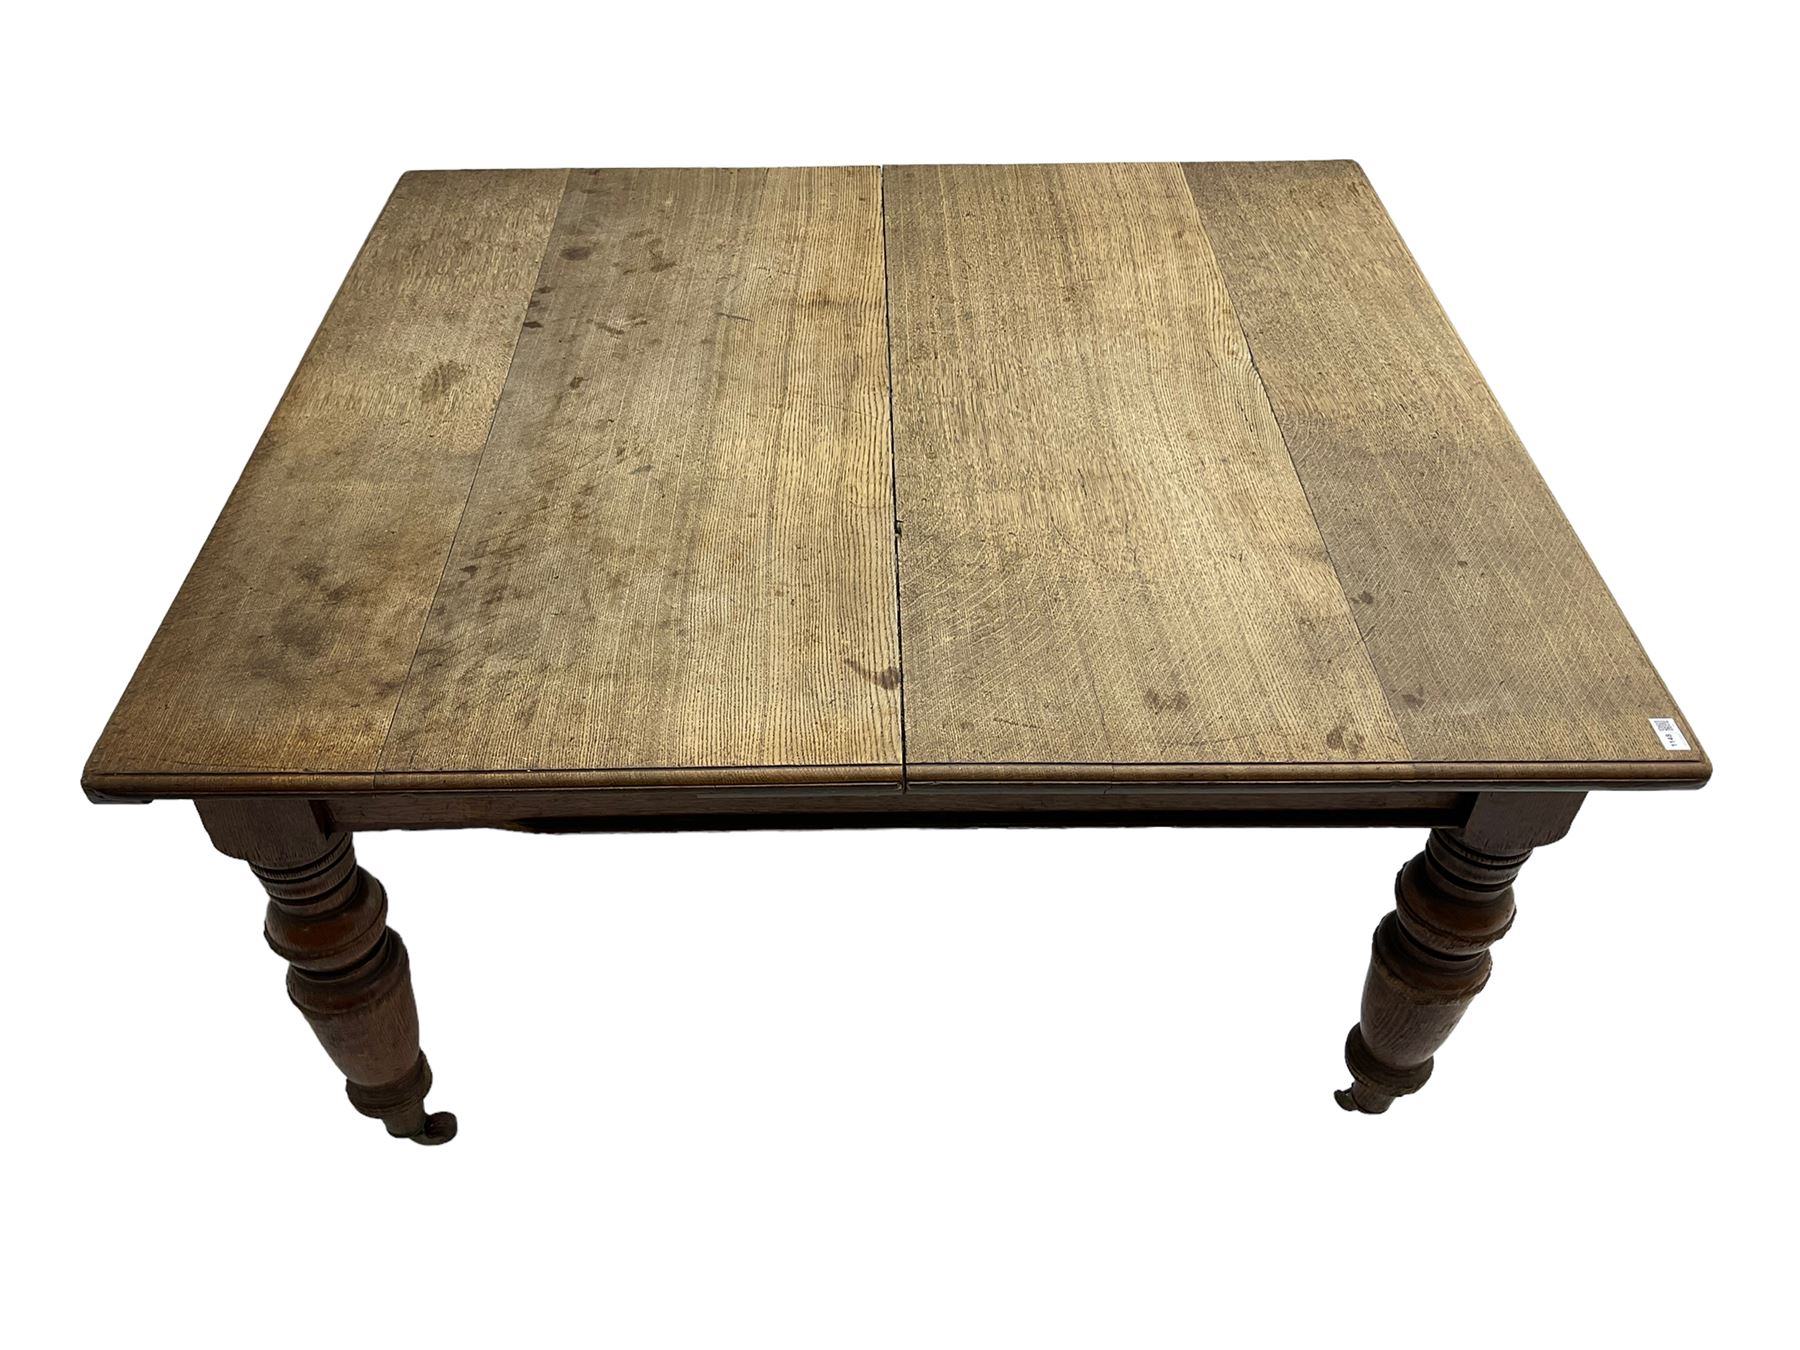 Late Victorian oak dining table - Image 2 of 5